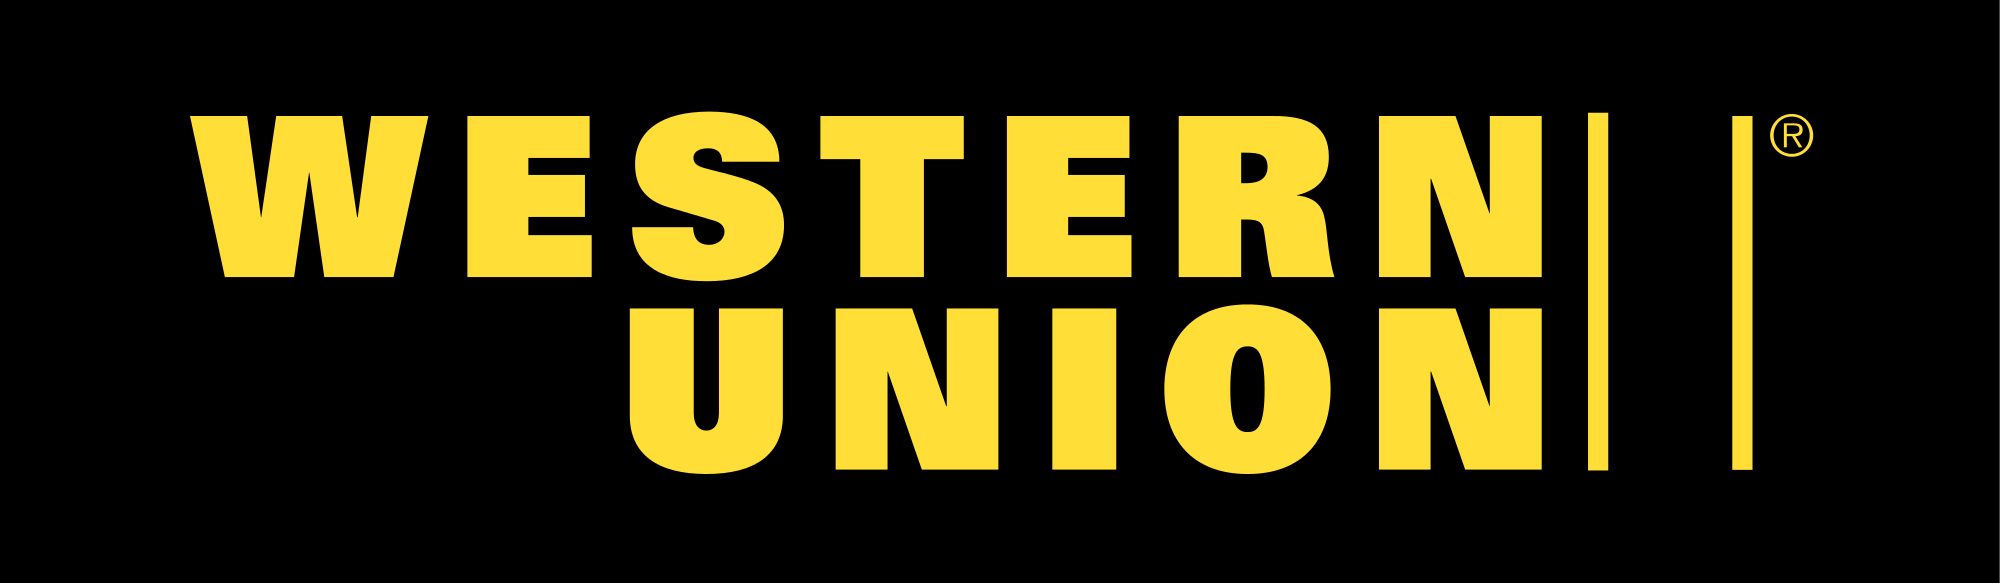 Western Union Vector PNG - 35809